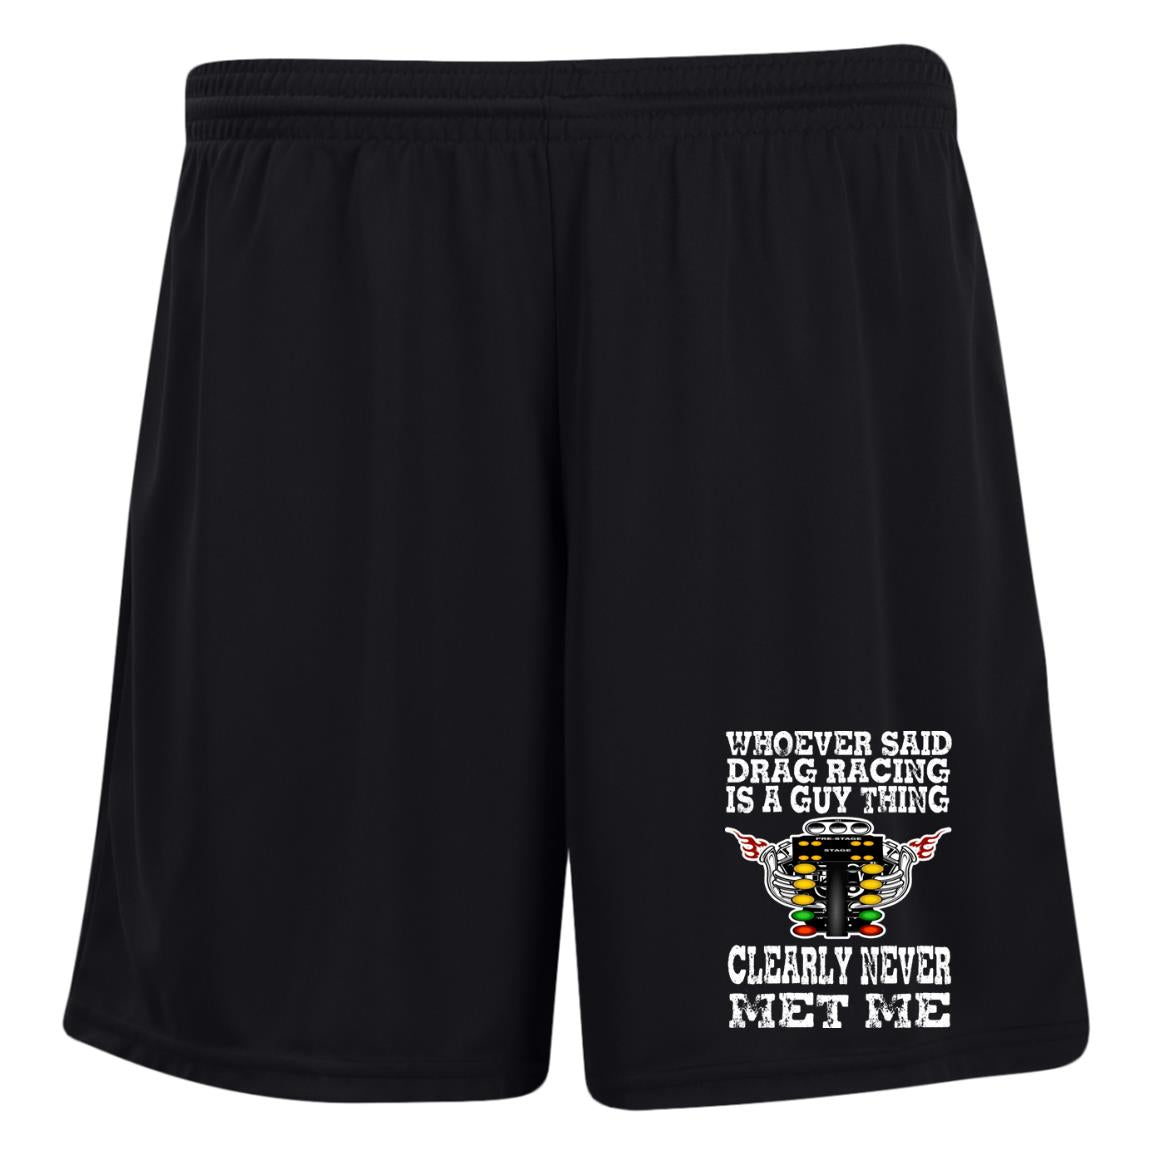 Whoever Said Drag Racing Is A Guy Thing Ladies' Moisture-Wicking 7 inch Inseam Training Shorts